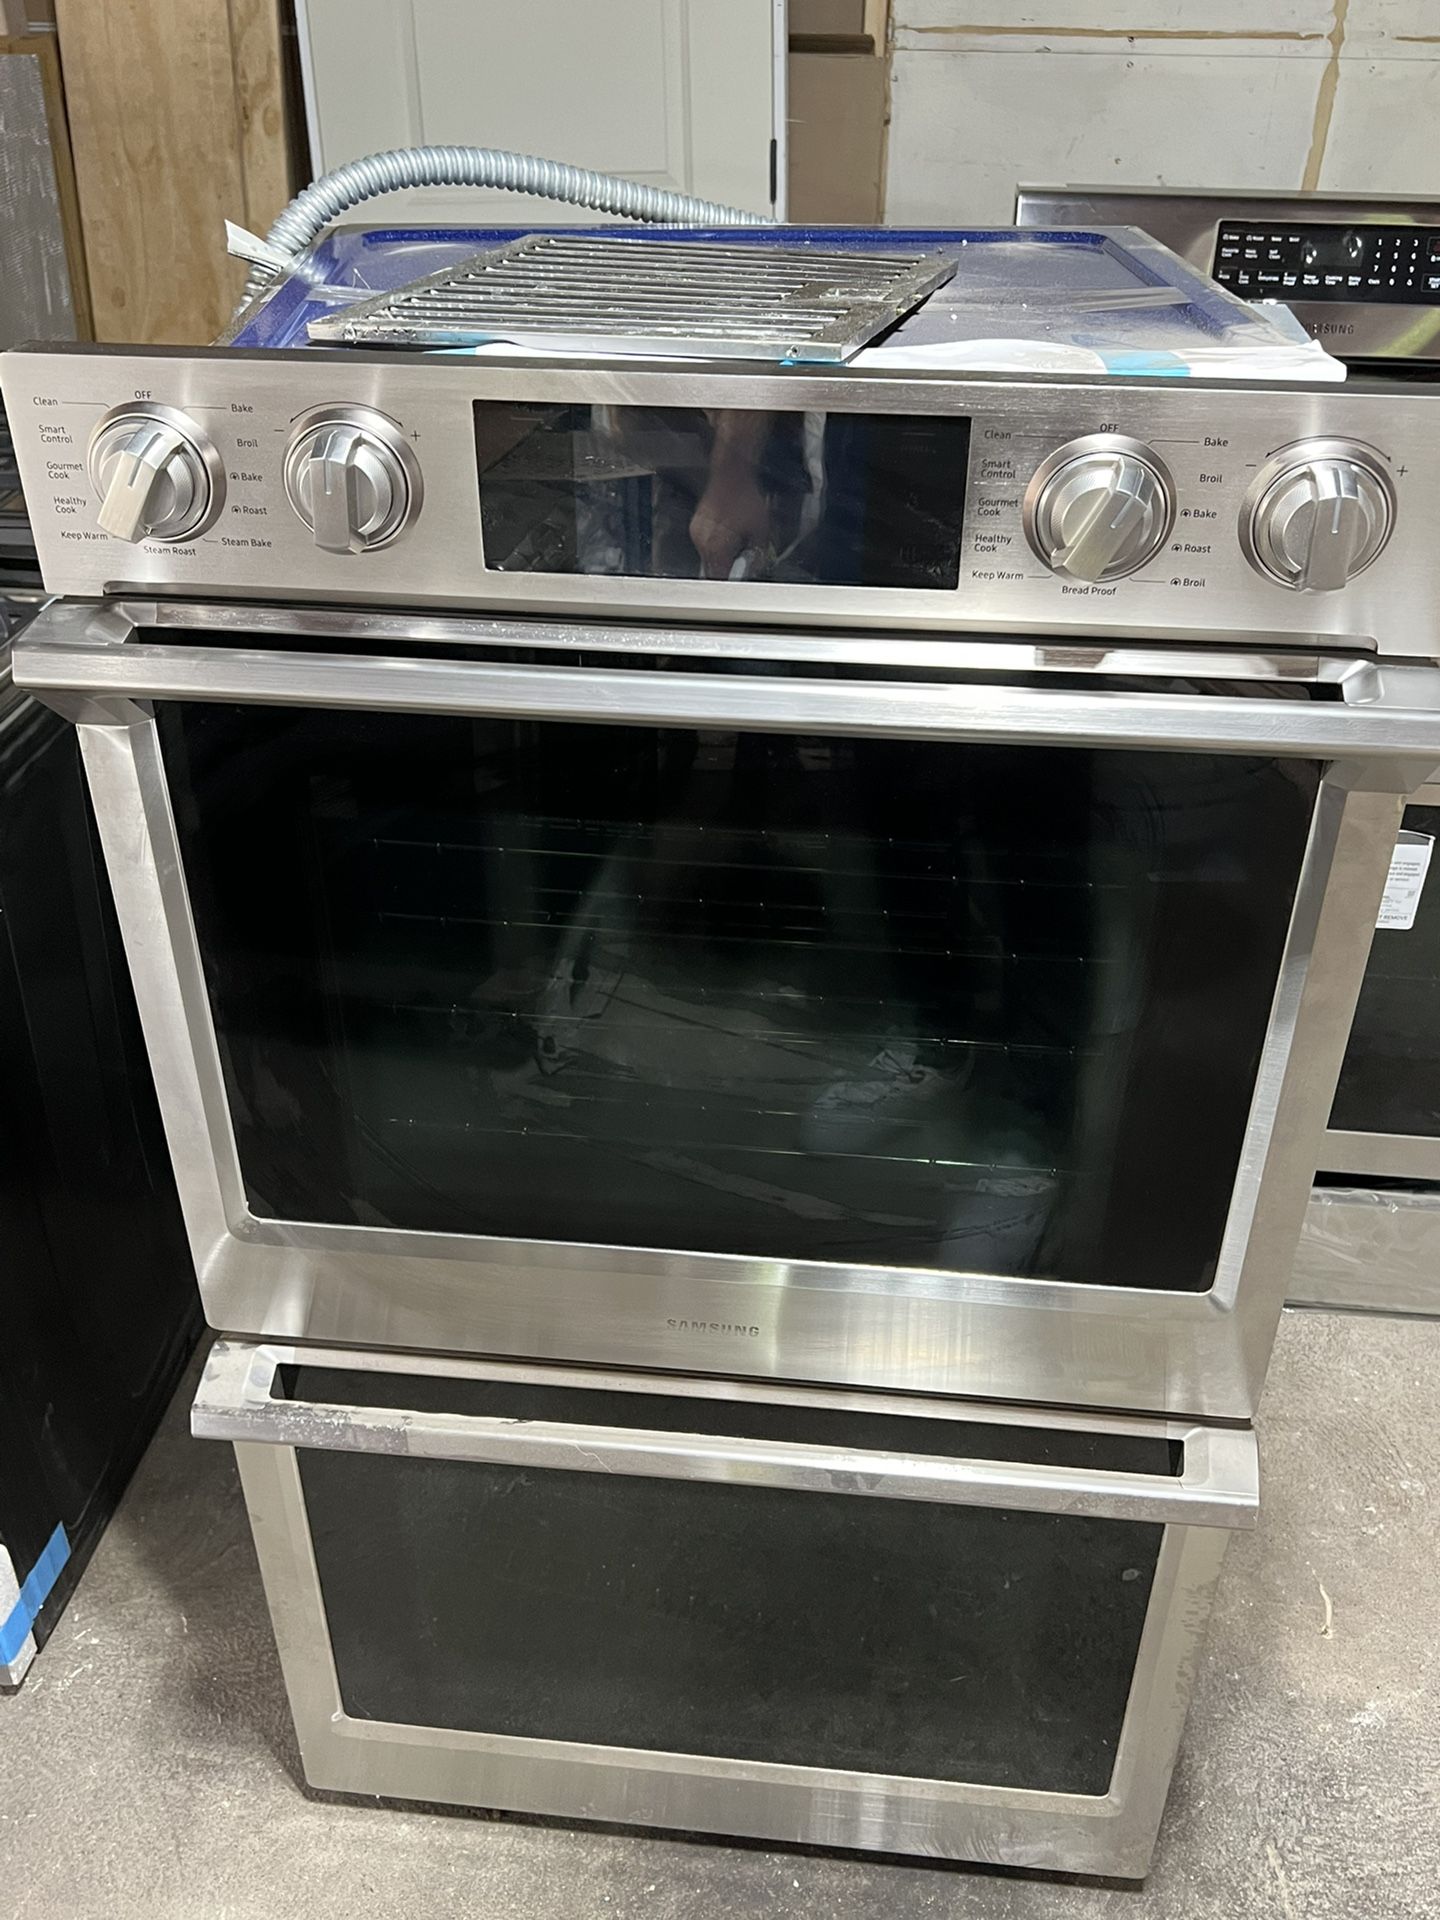 Samsung Gas Smart Double Wall Oven with Flex Duo Retail Price 3000$